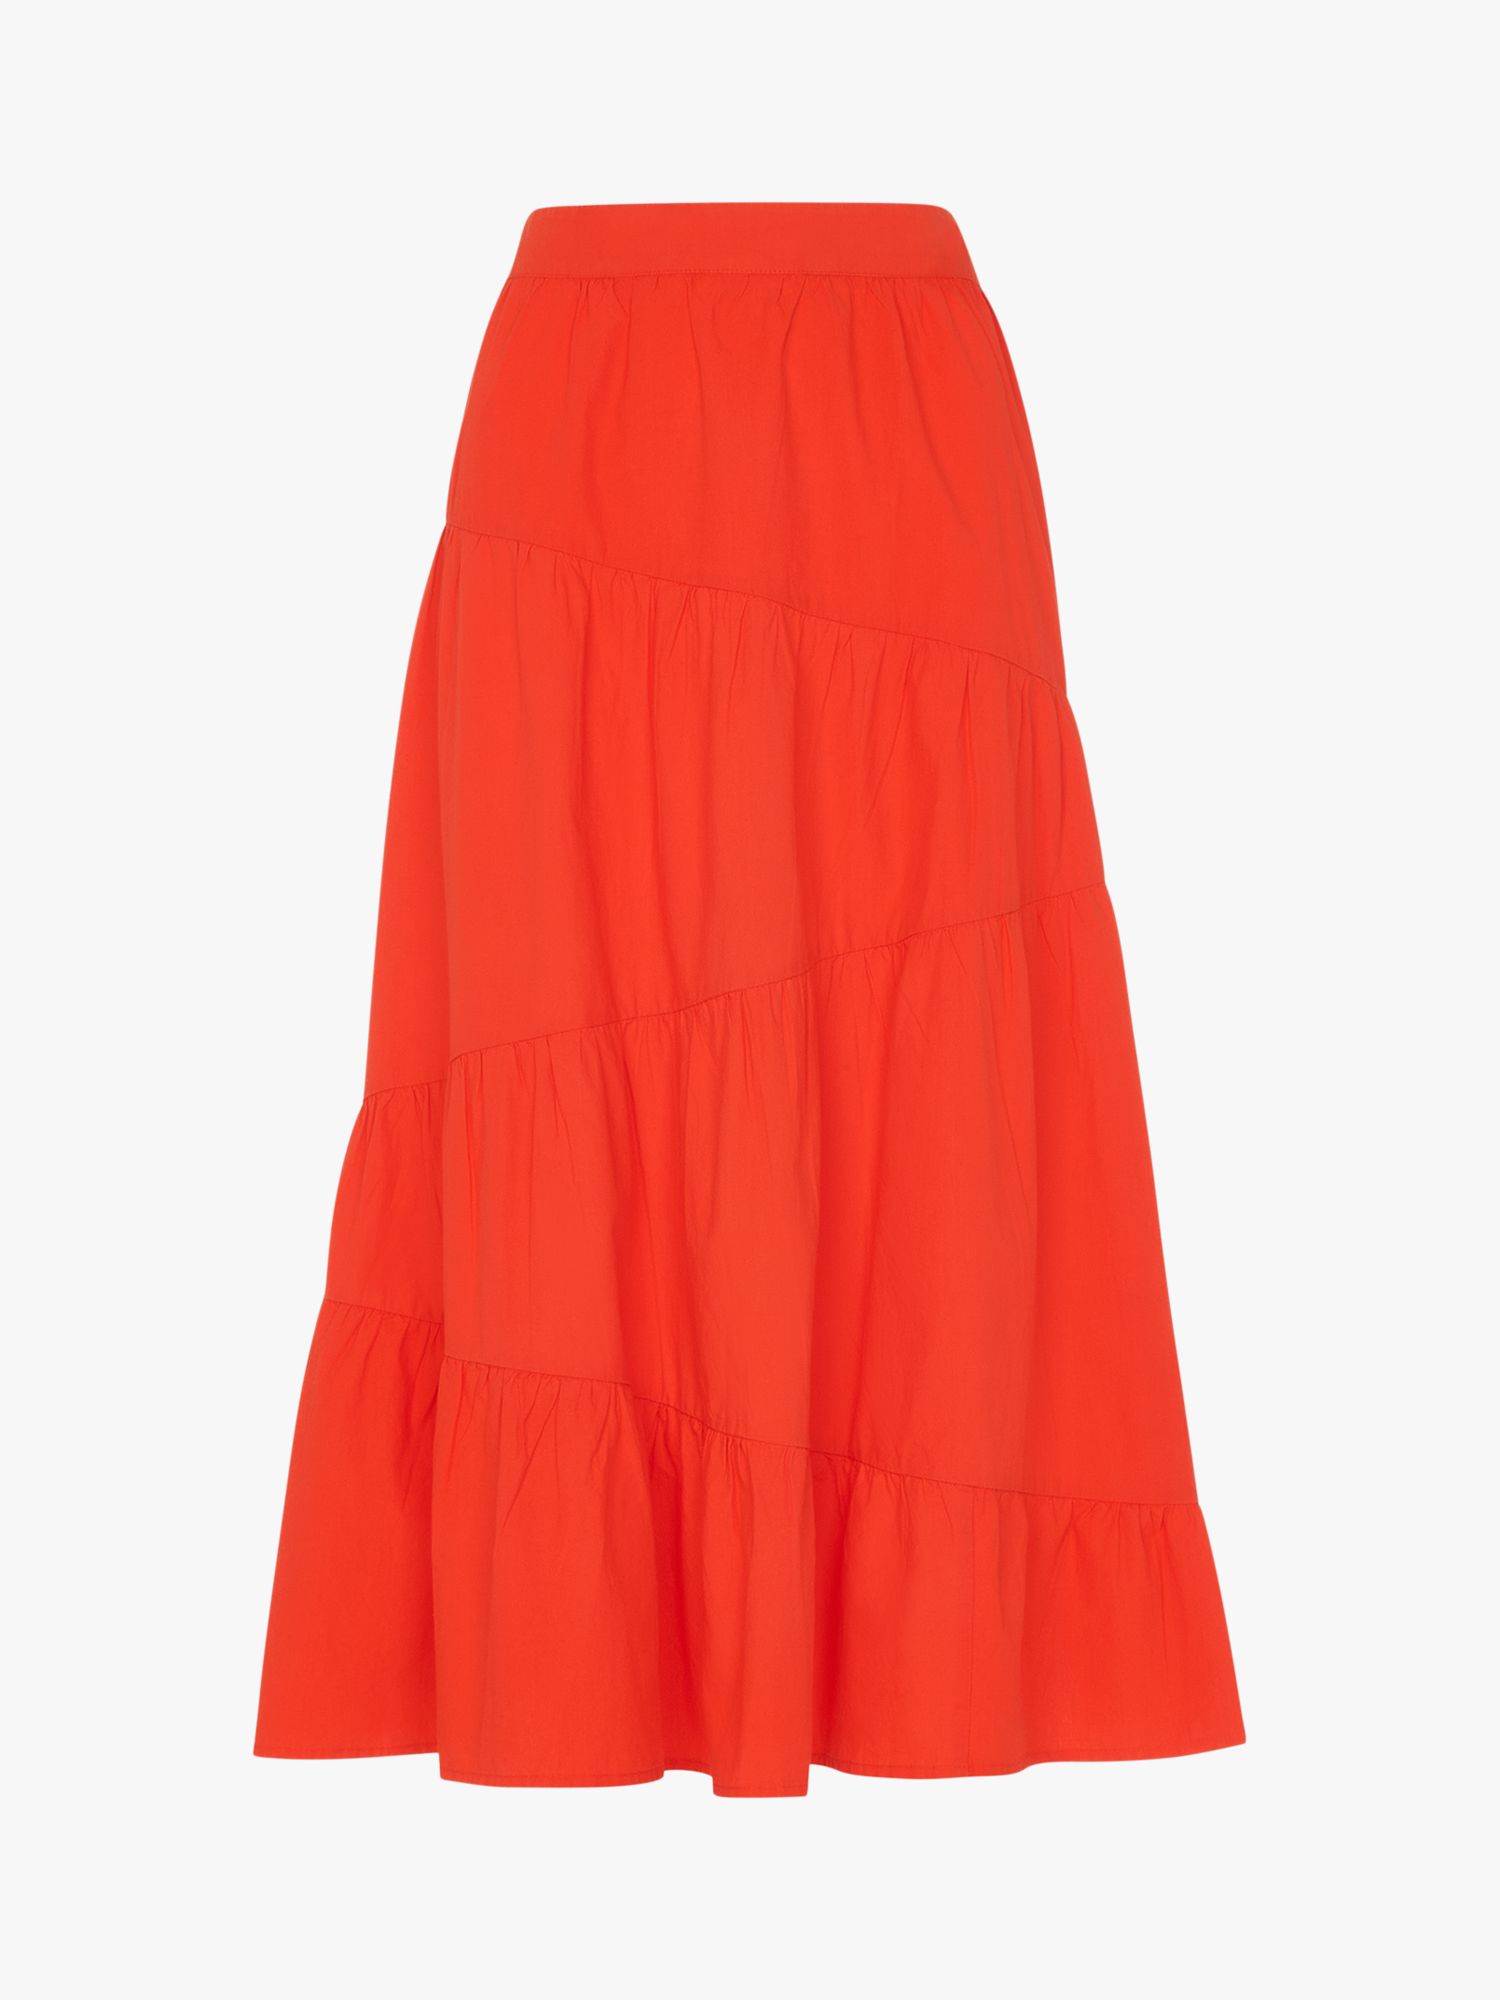 Whistles Maria Full Tiered Midi Skirt, Red at John Lewis & Partners